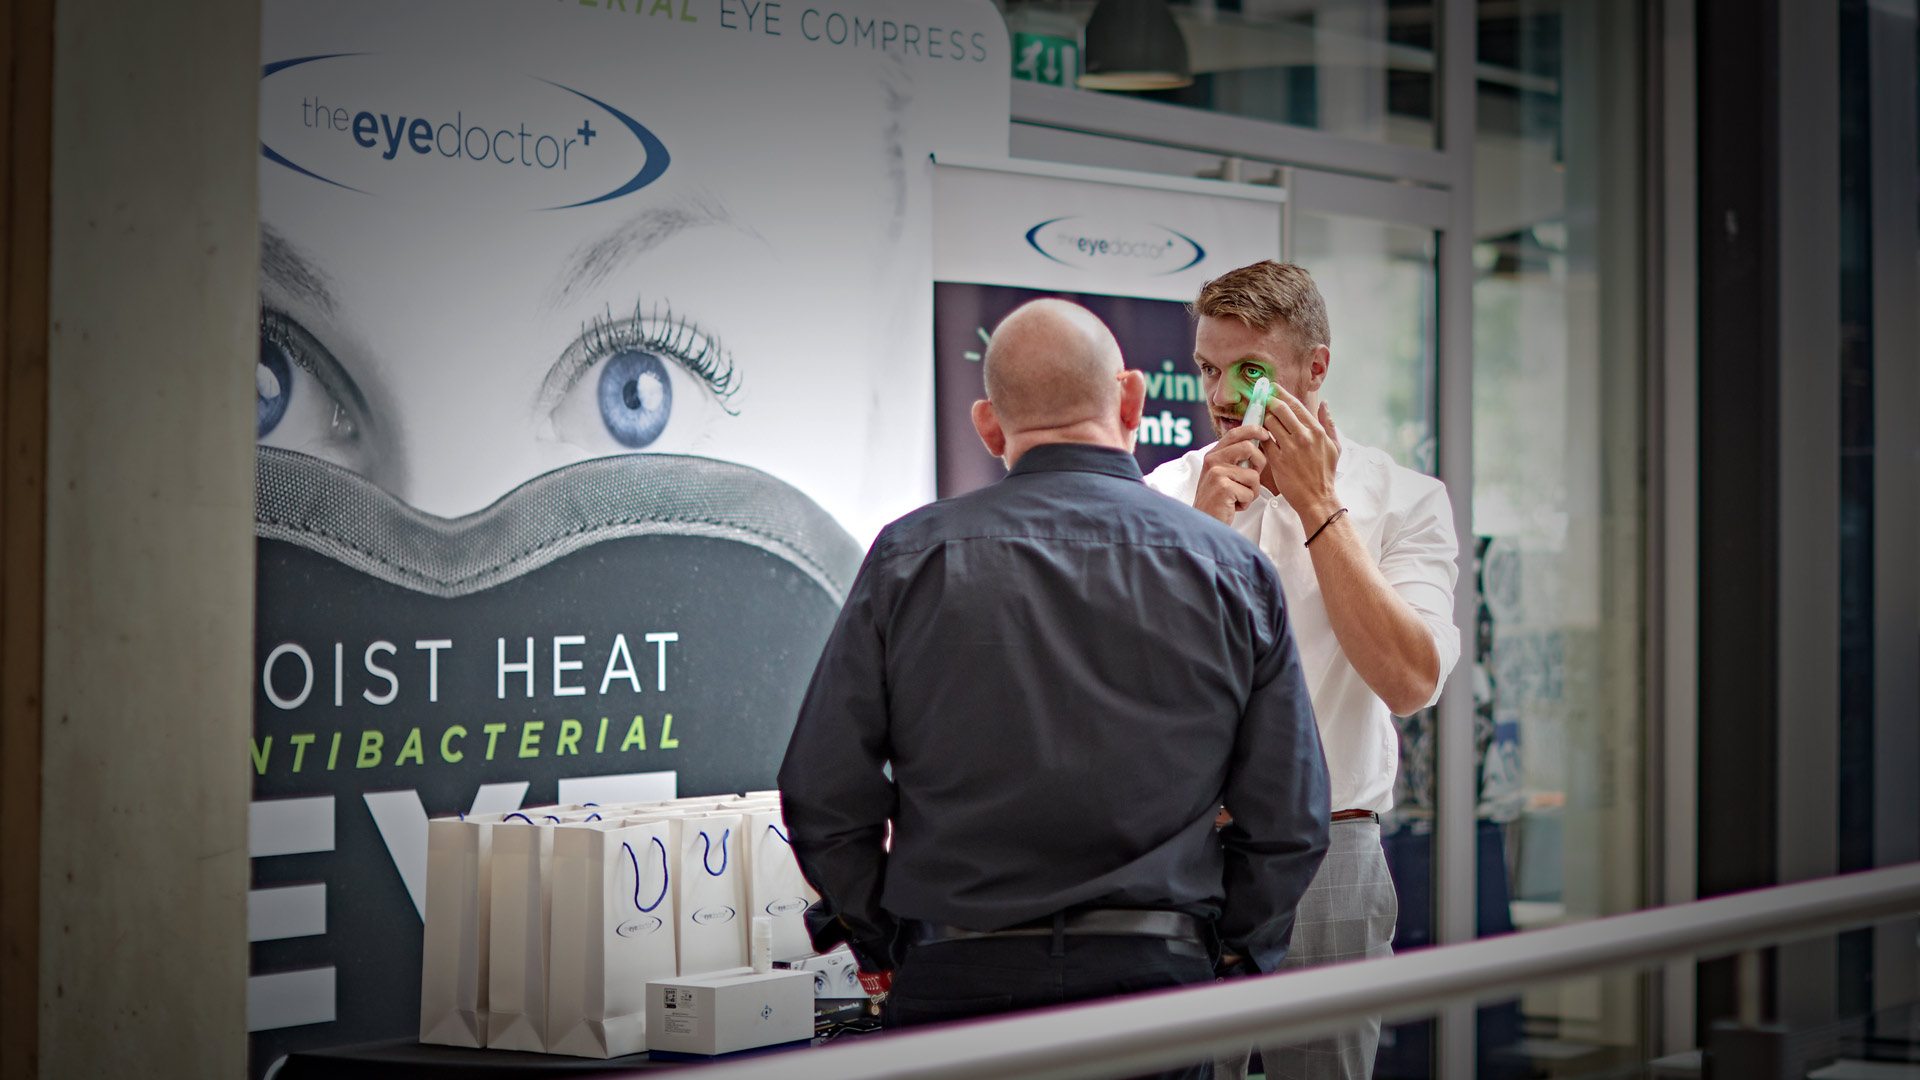 Leading eye care brands showcased their products at the opening of the new eye clinic